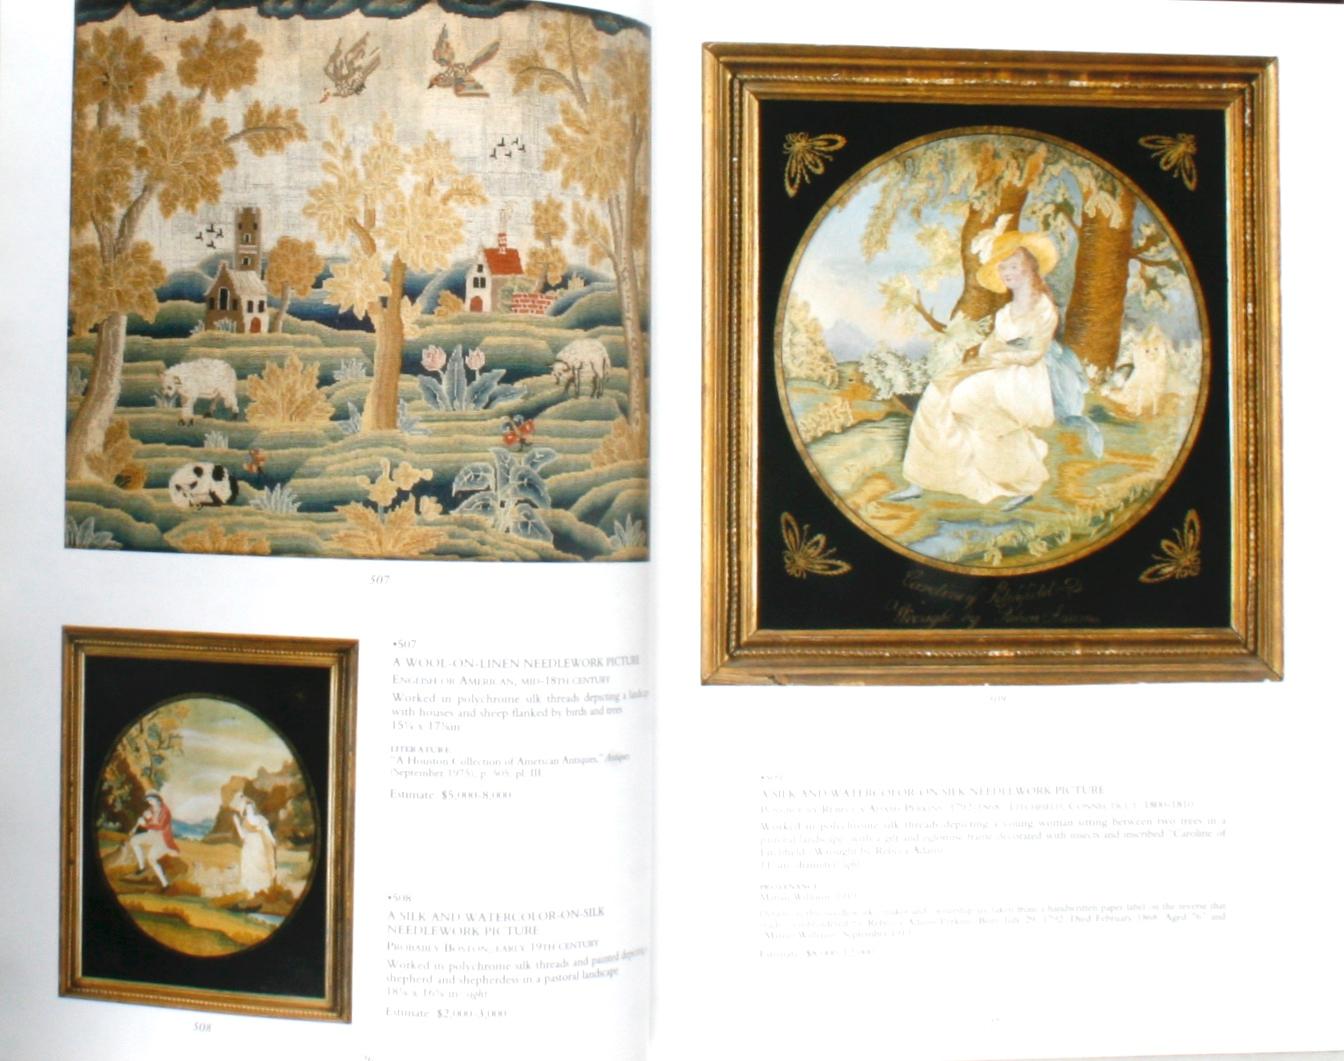 American Collection of Mr. and Mrs. James L. Britton: Christie's, New York For Sale